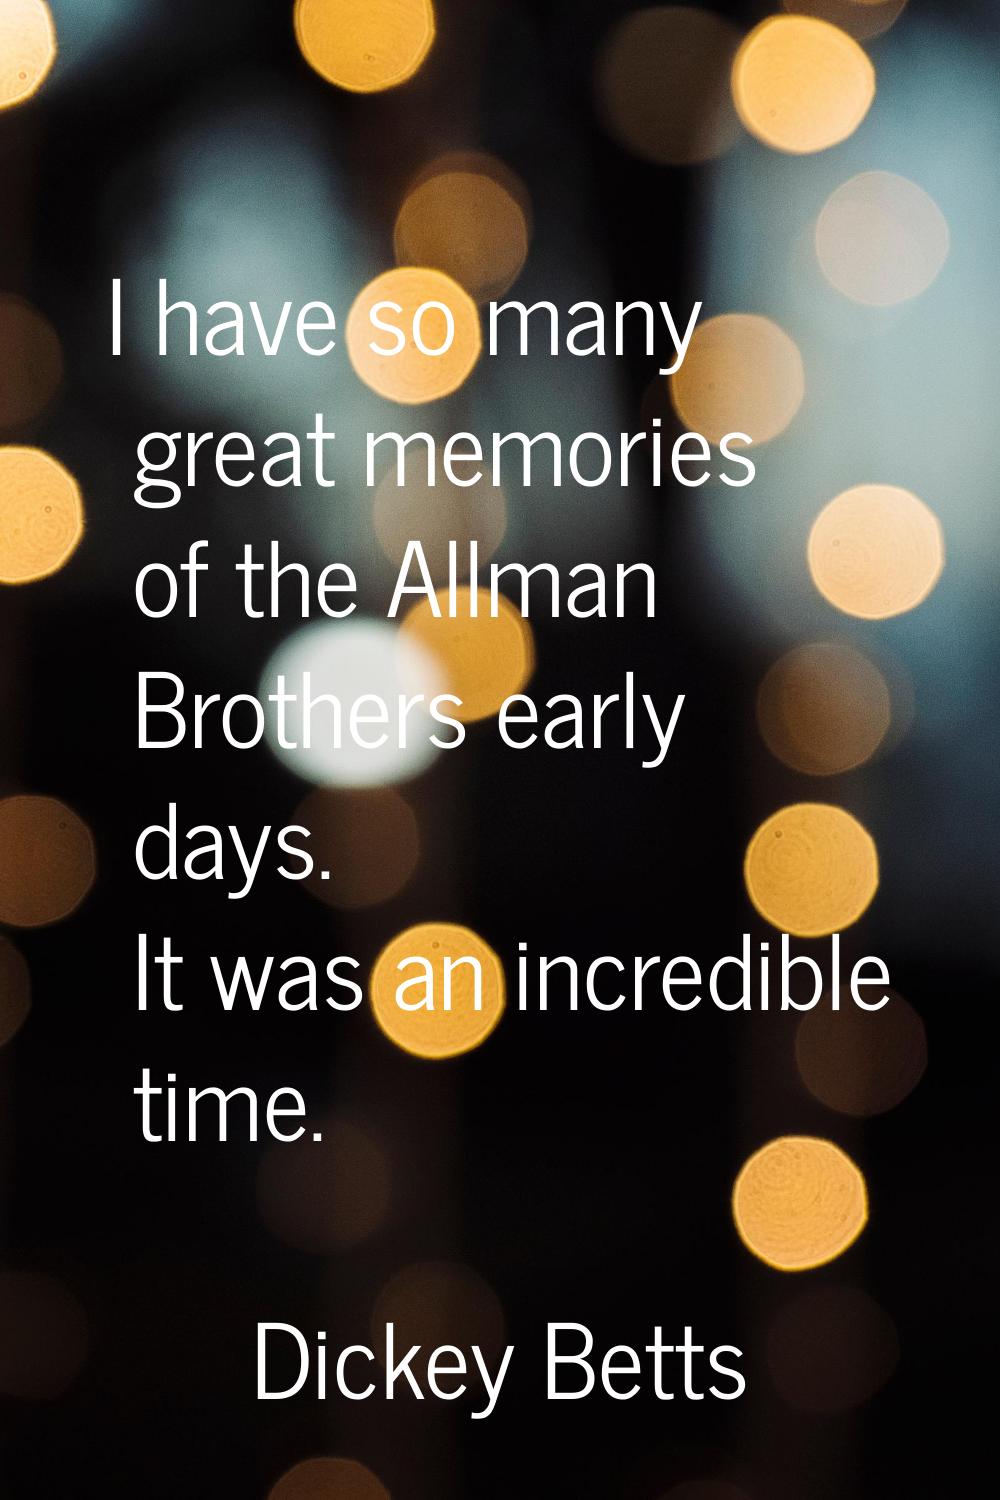 I have so many great memories of the Allman Brothers early days. It was an incredible time.